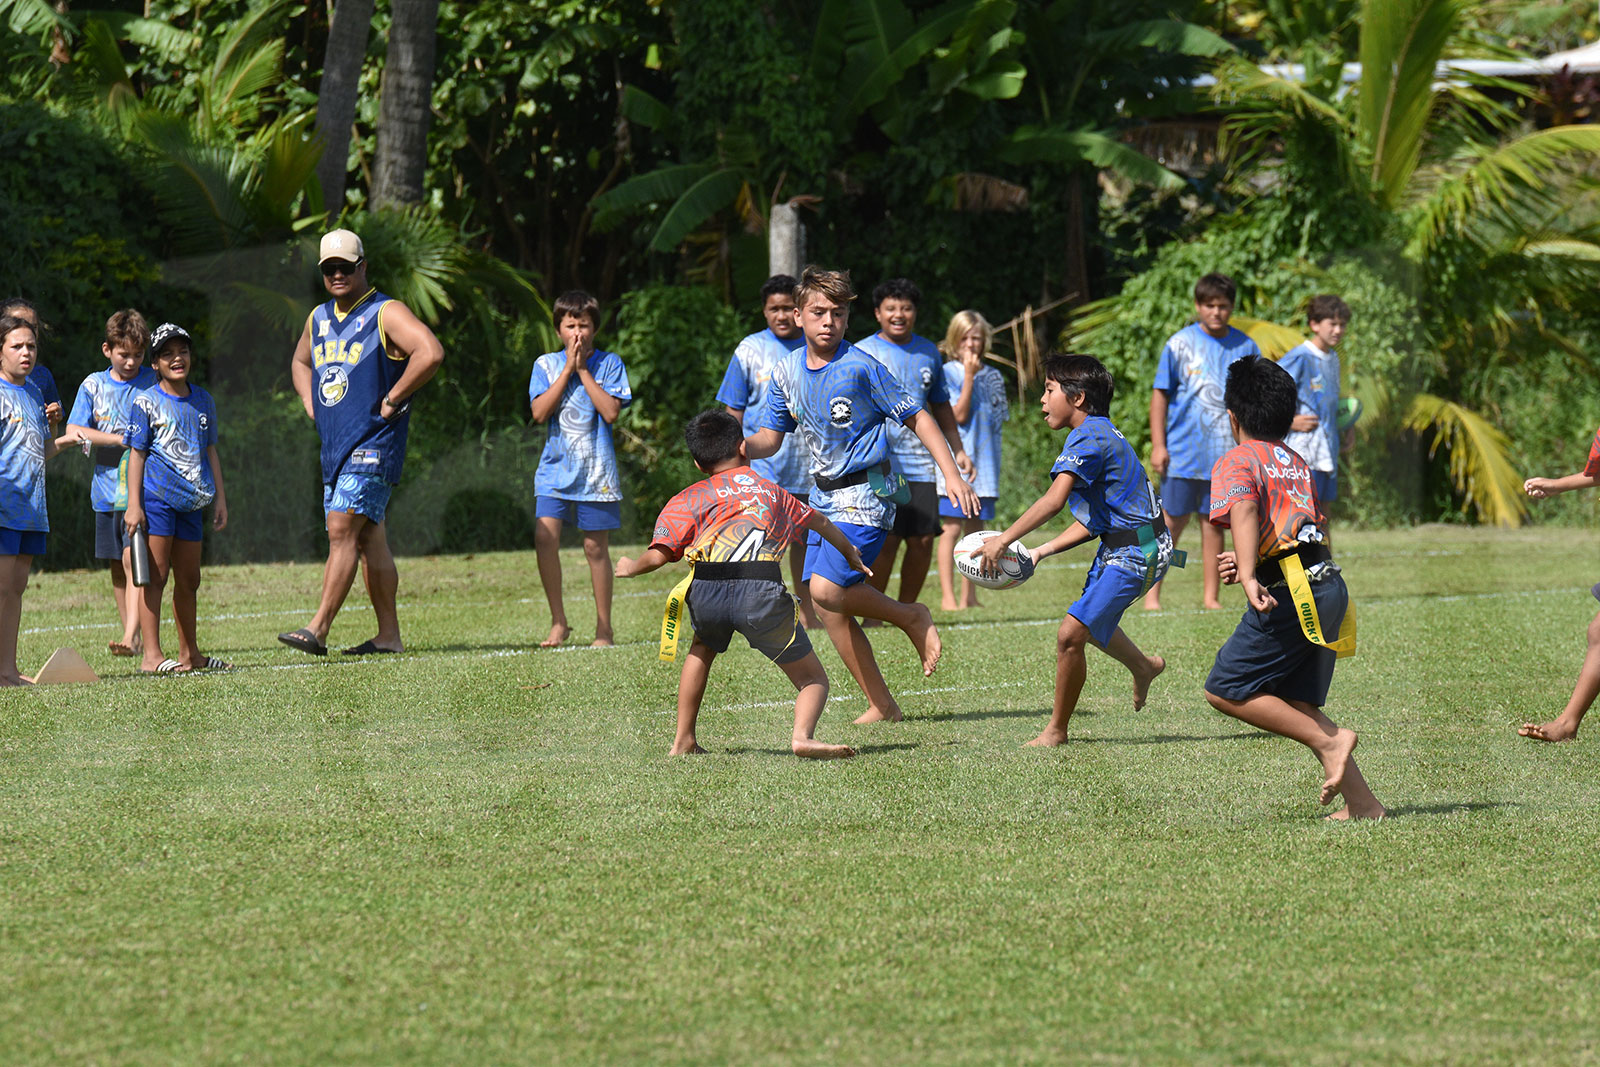 Rippa and rugby 7s off to flying start